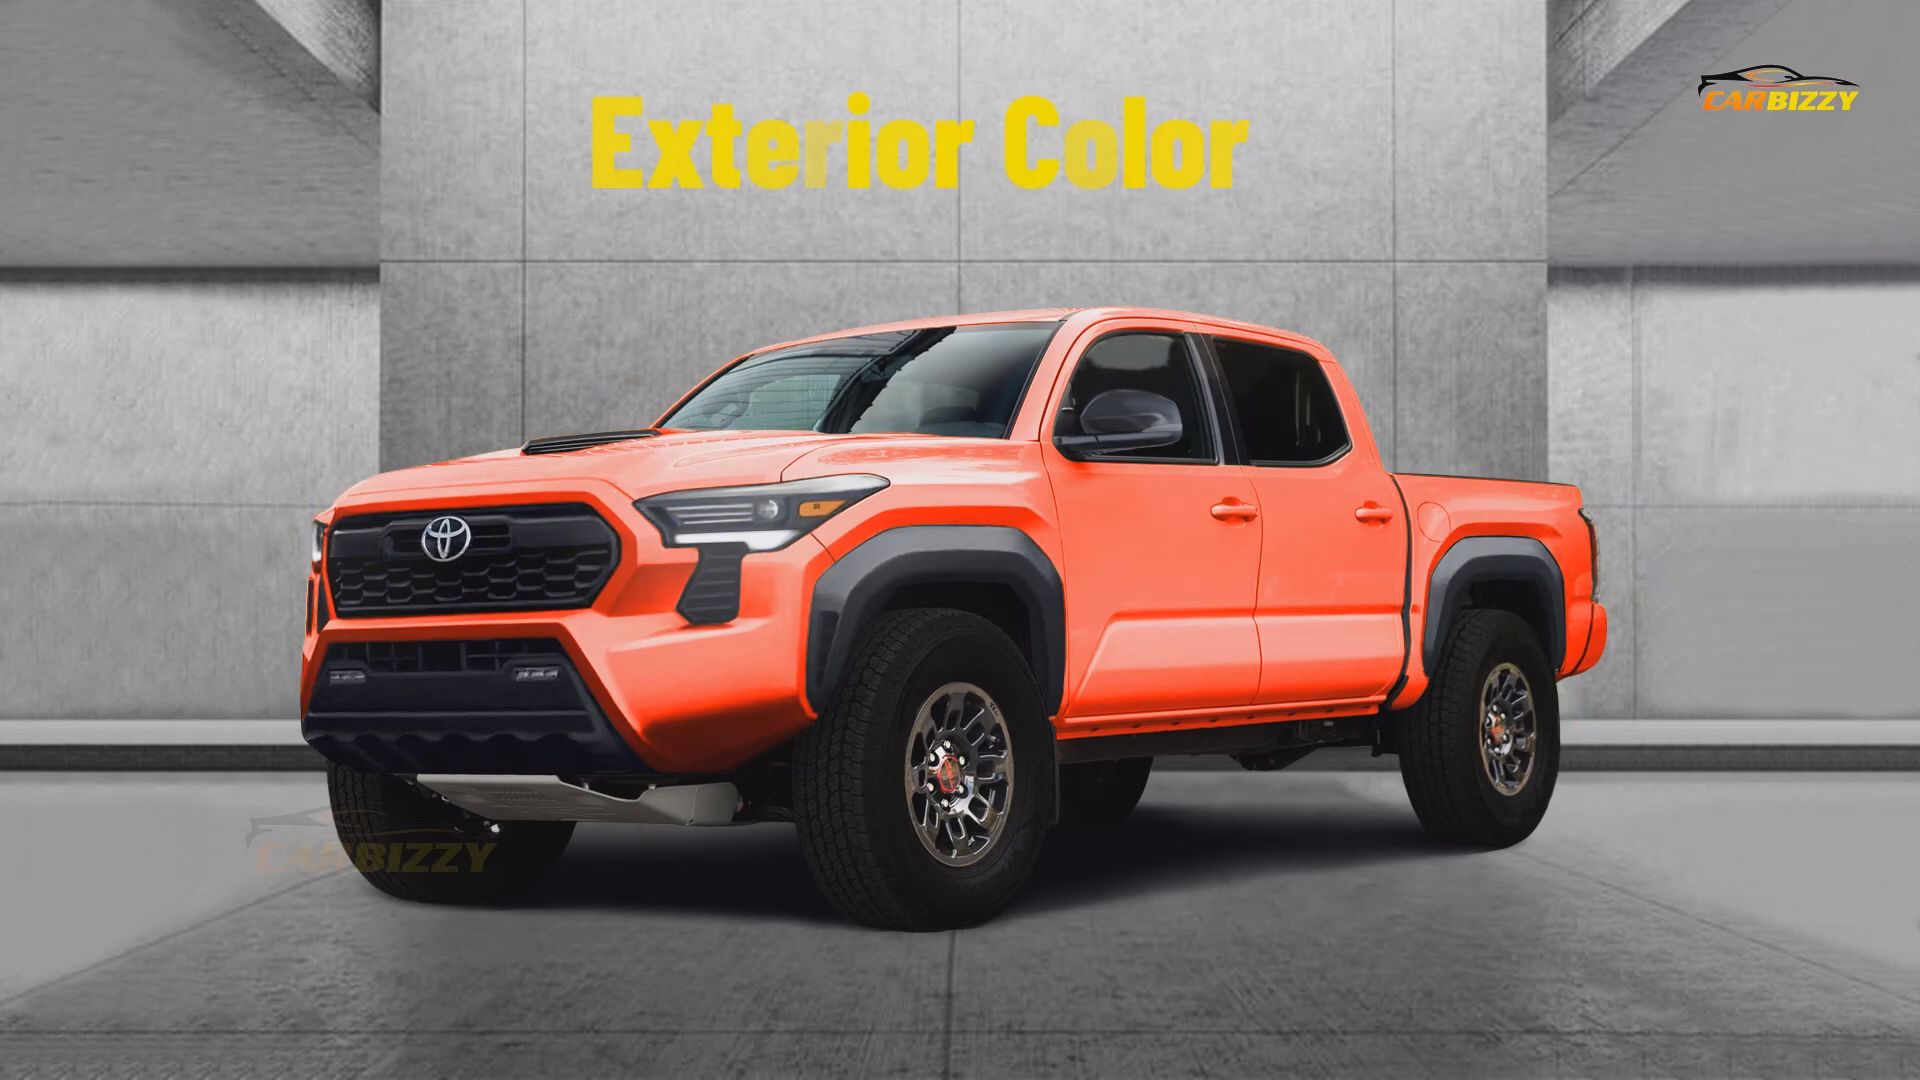 2024 Toyota Tacoma Rendered In Colorful Way Next Gen Truck May Go